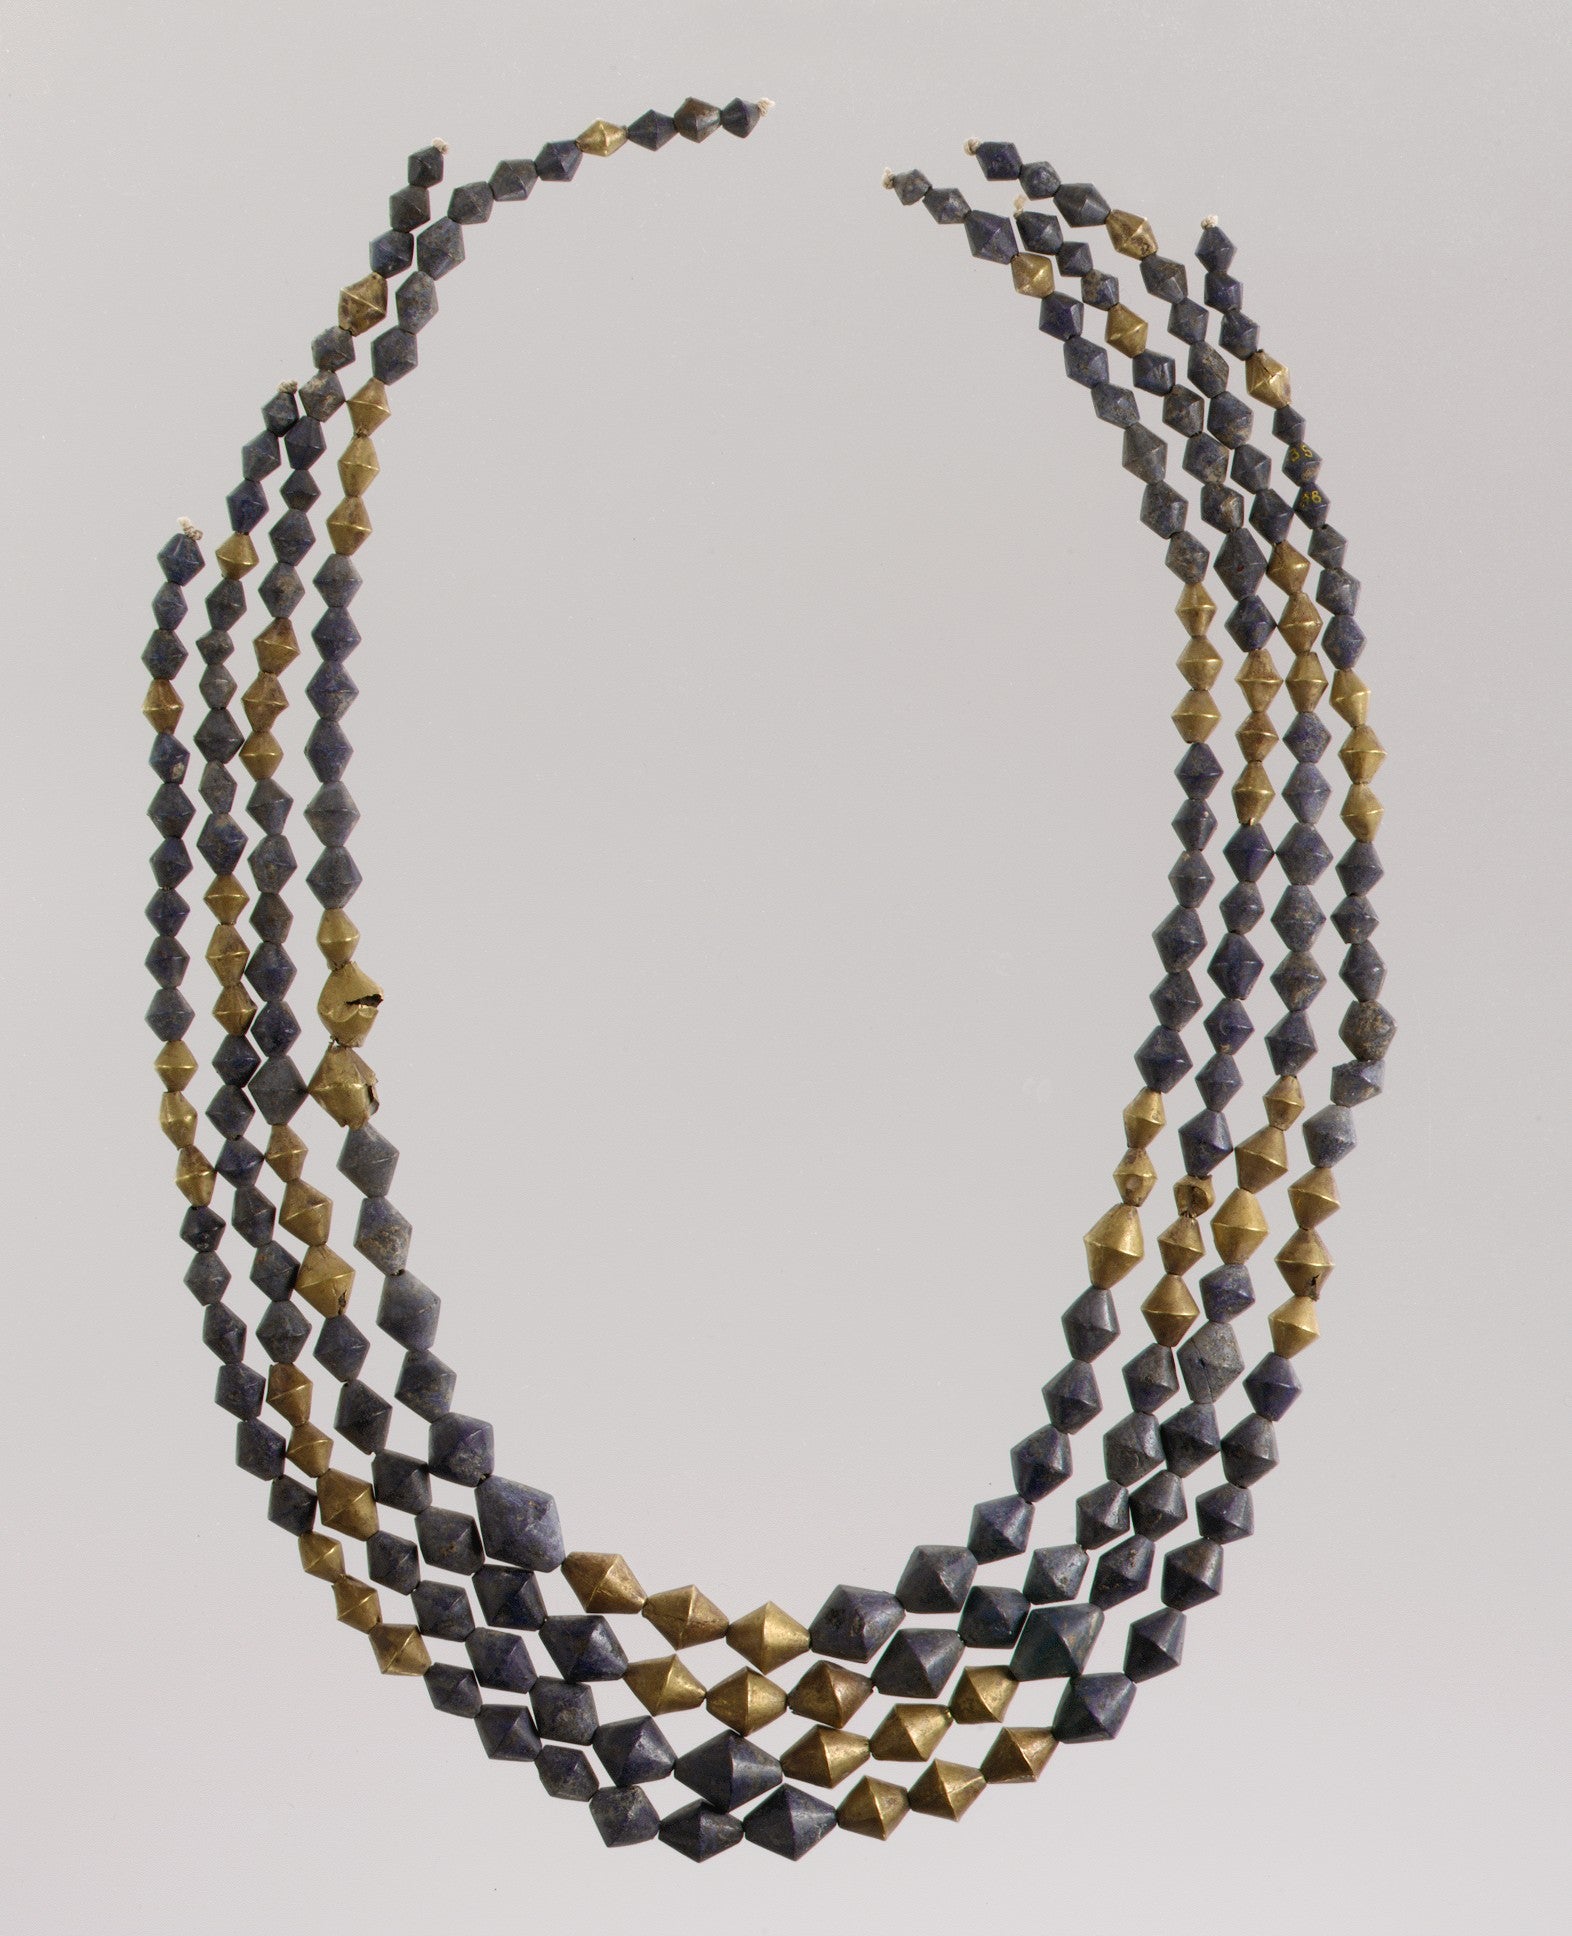 Necklace beads